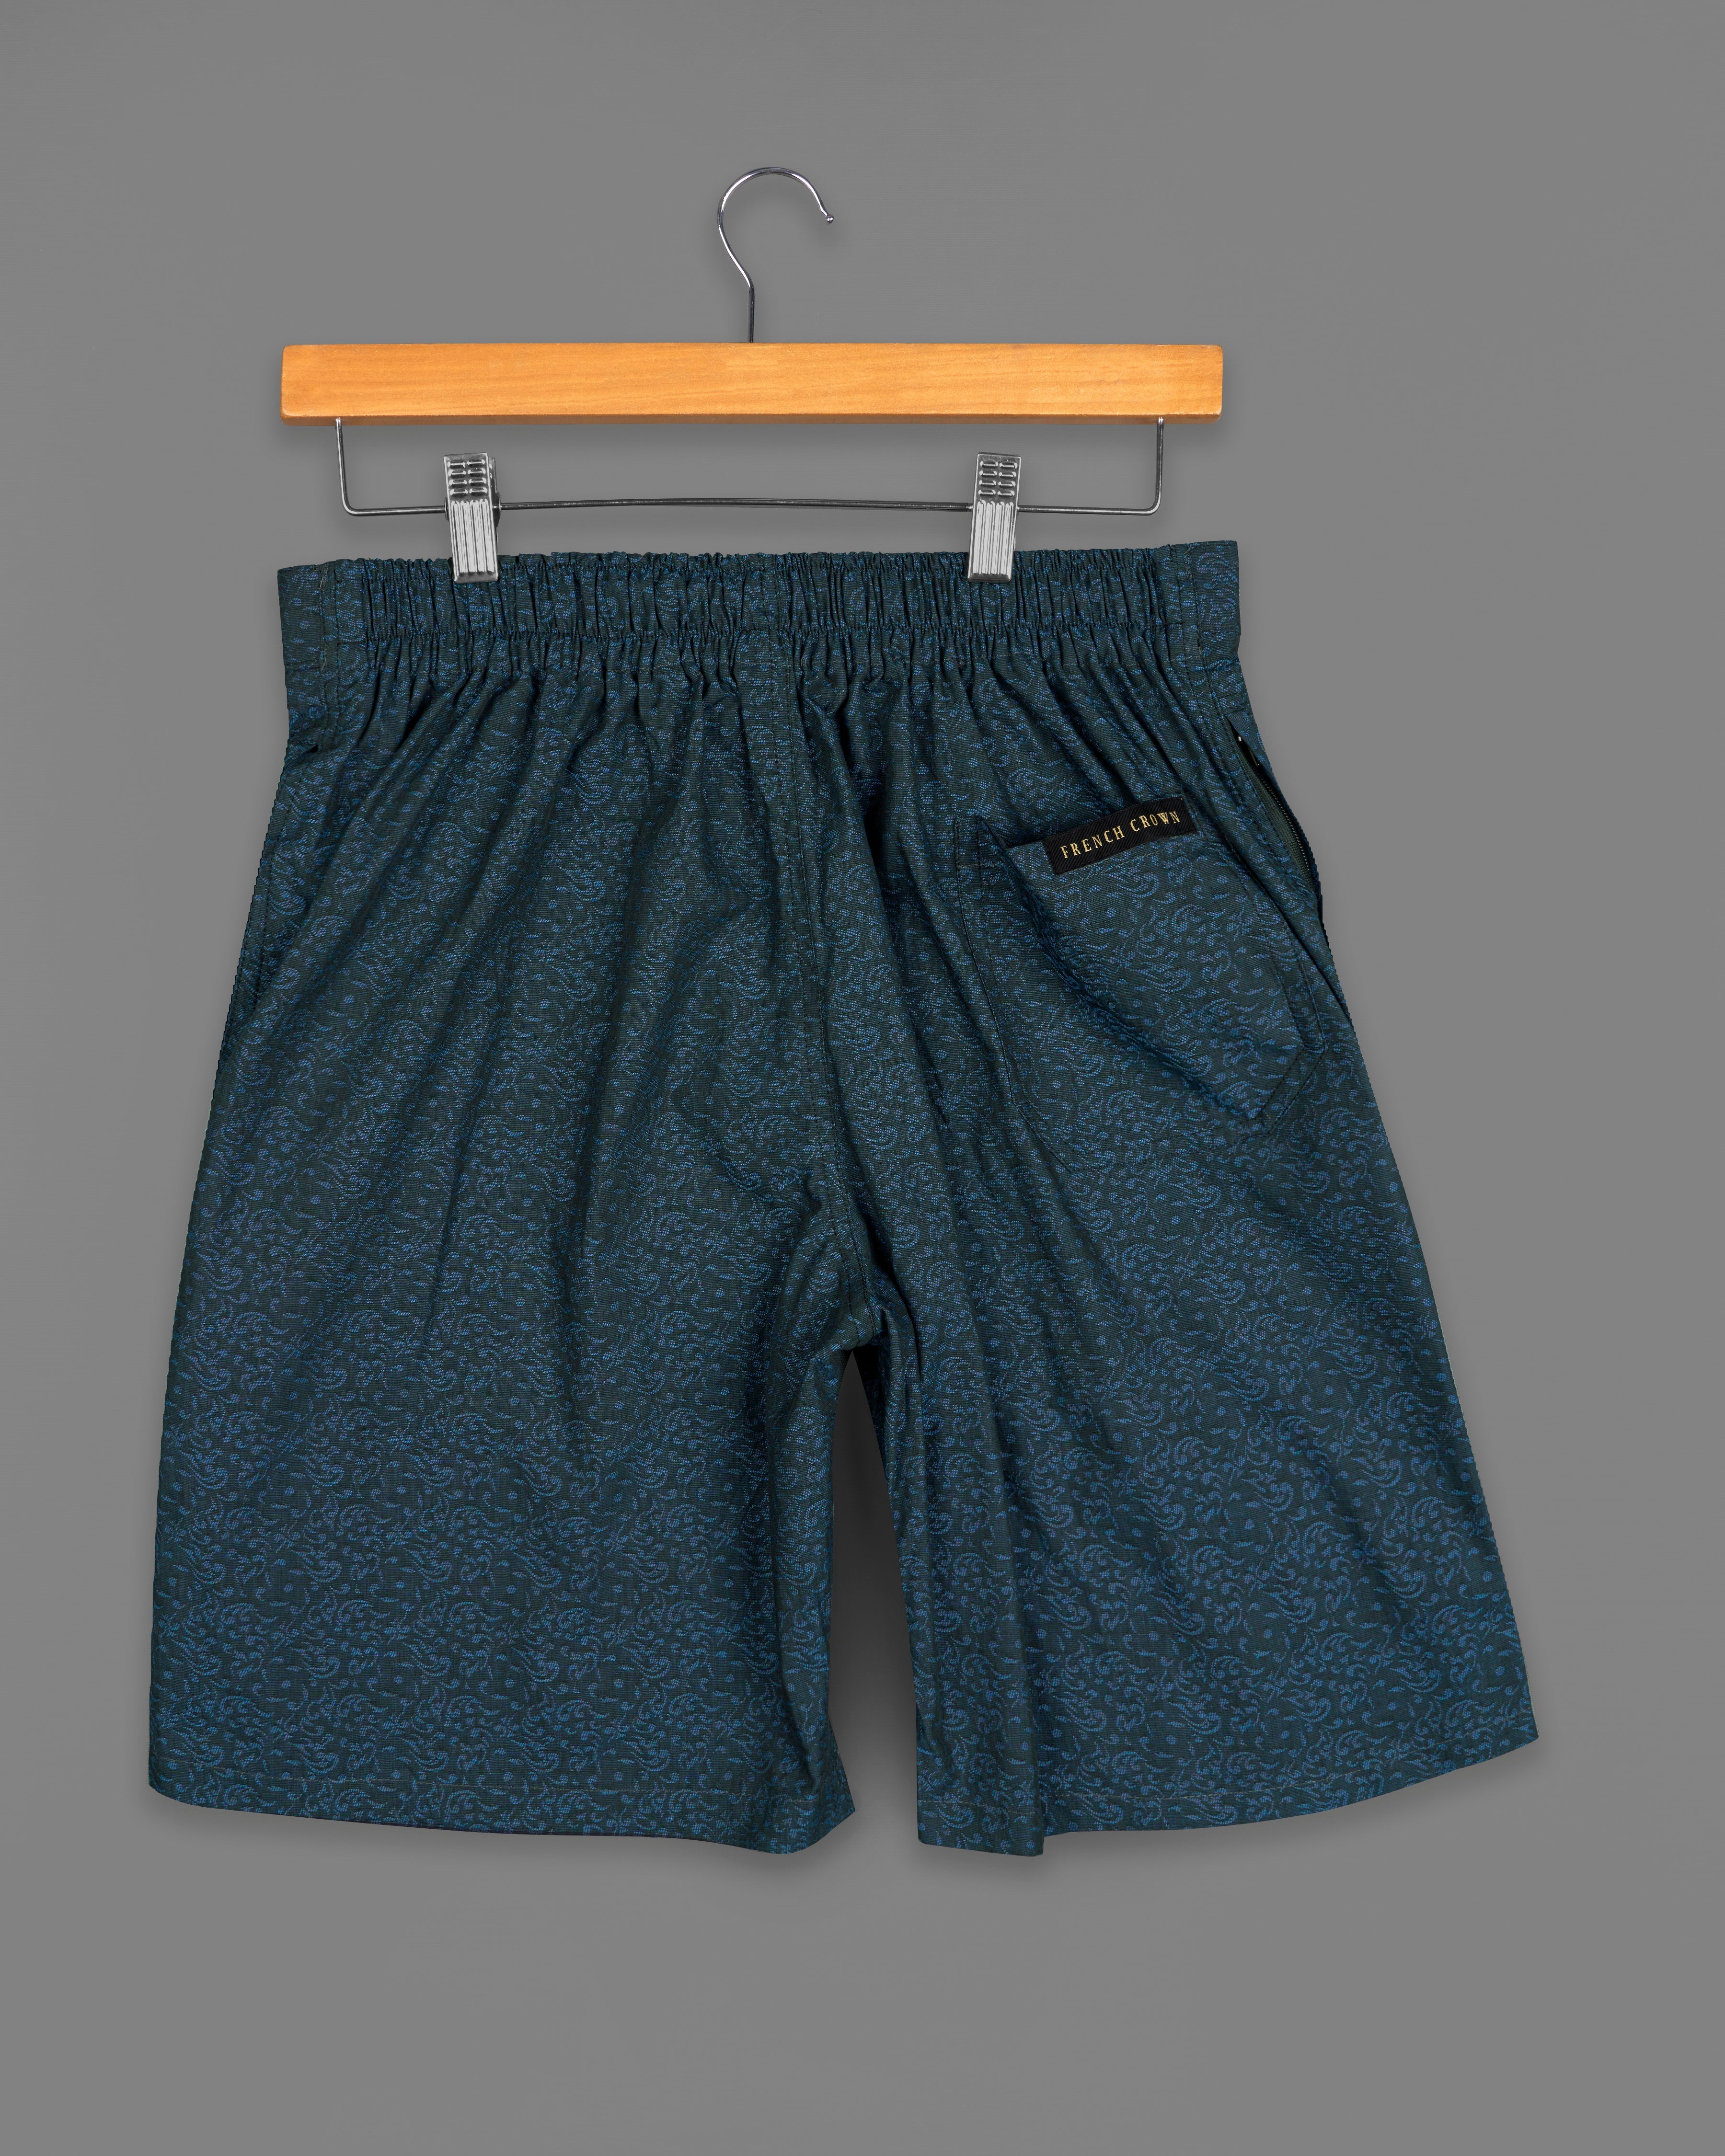 Pickled Blue and Black Jacquard Textured Giza Cotton Shorts SR250-28, SR250-30, SR250-32, SR250-34, SR250-36, SR250-38, SR250-40, SR250-42, SR250-44